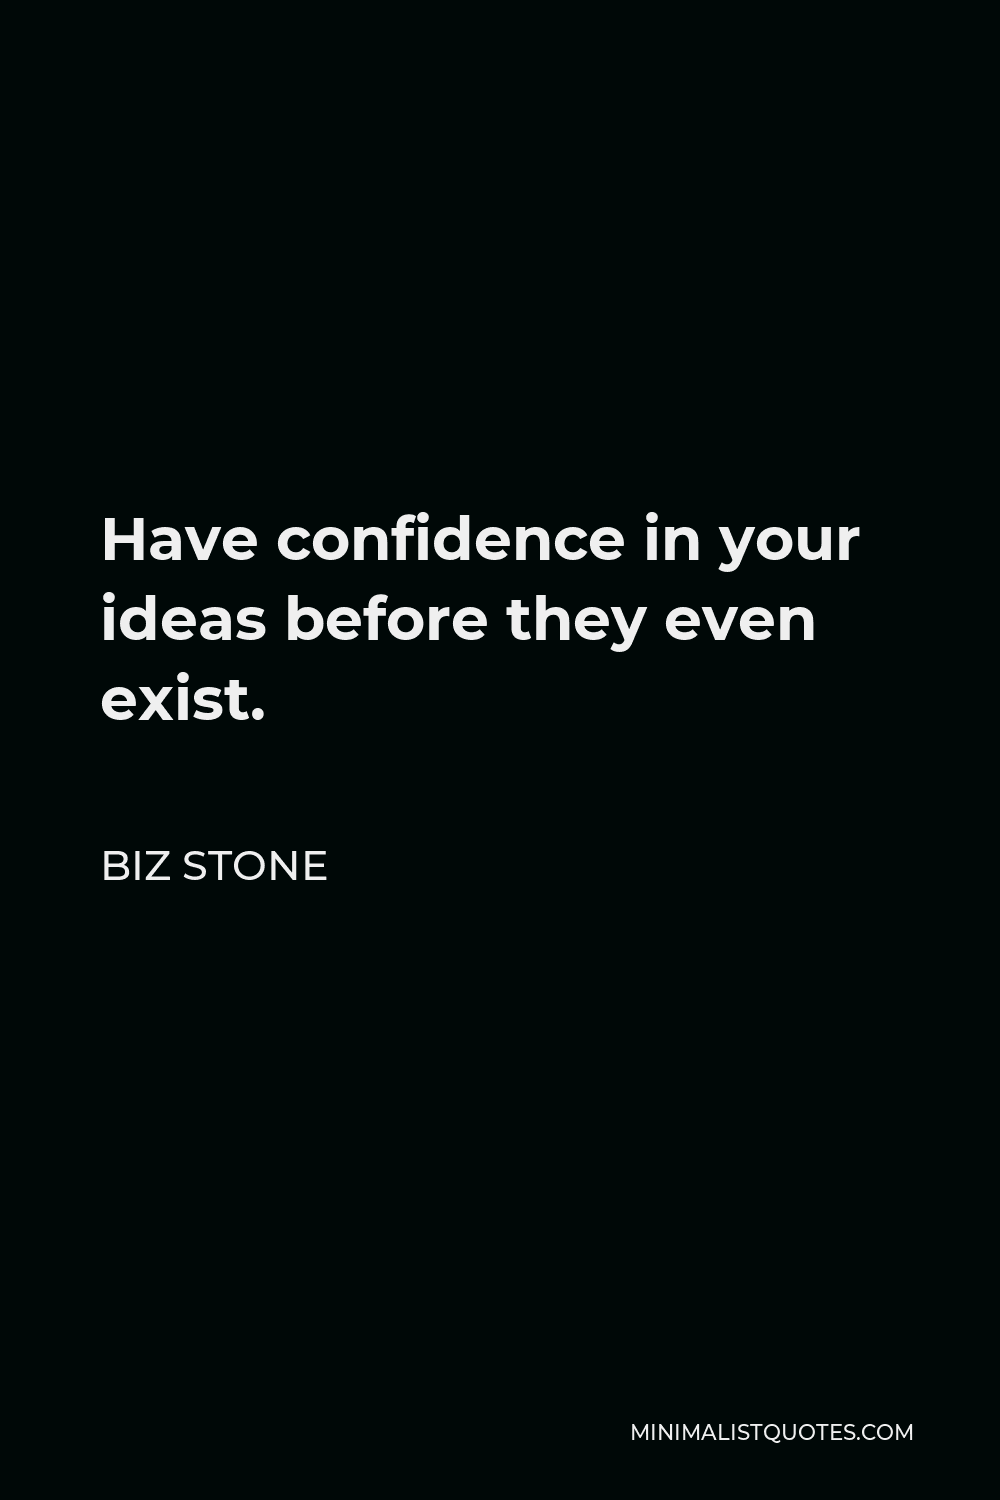 Biz Stone Quote - Have confidence in your ideas before they even exist.